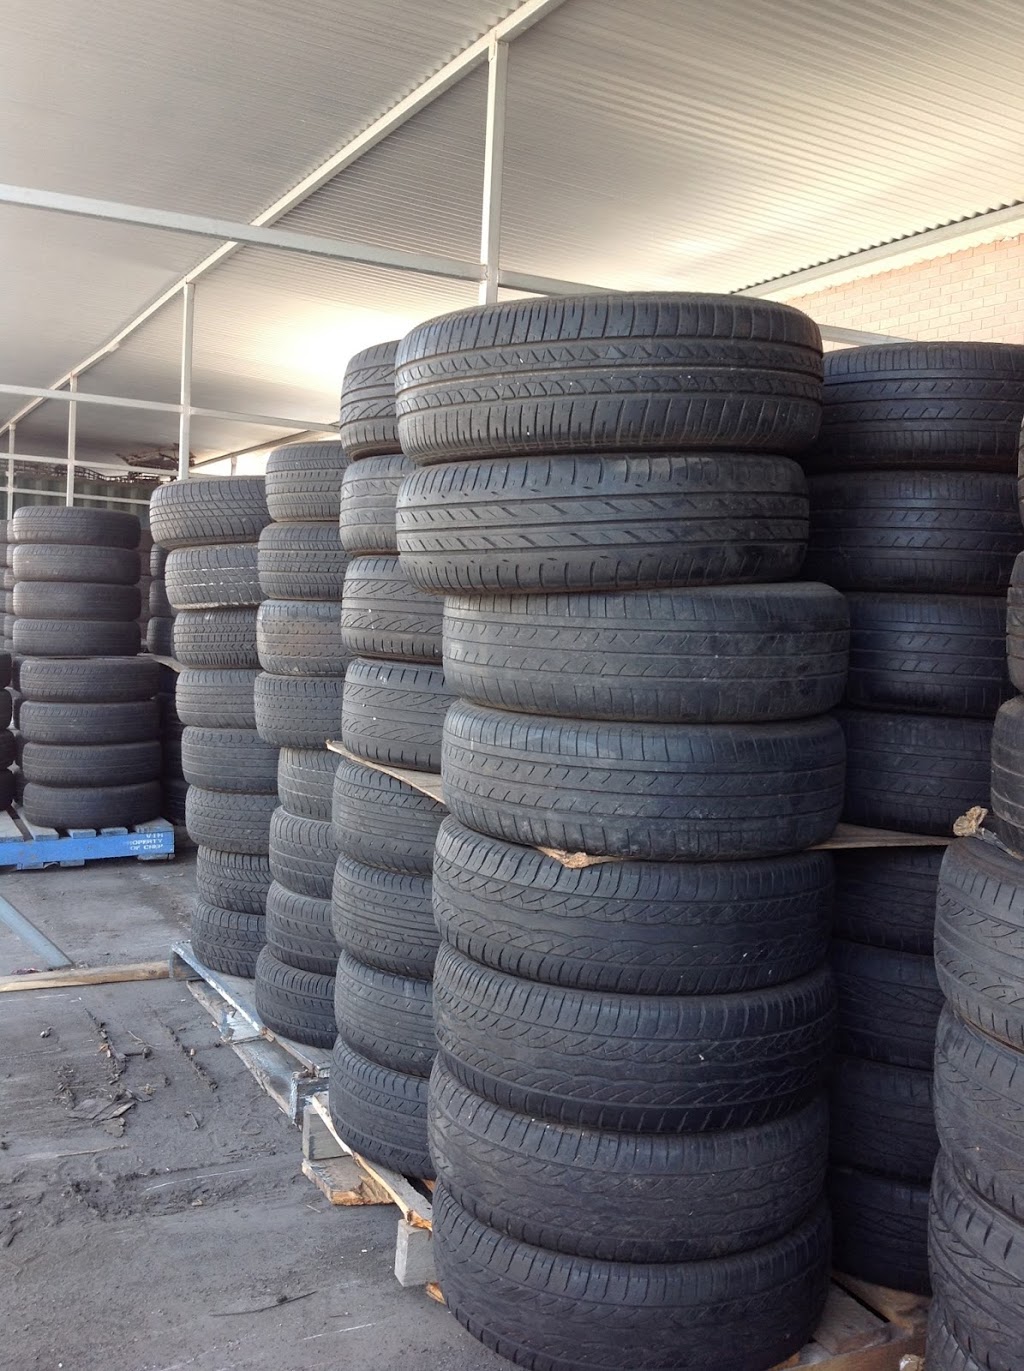 D and J New and Used Tyres | car repair | 21-23 Glenbarry Rd, Campbellfield VIC 3061, Australia | 0393570678 OR +61 3 9357 0678